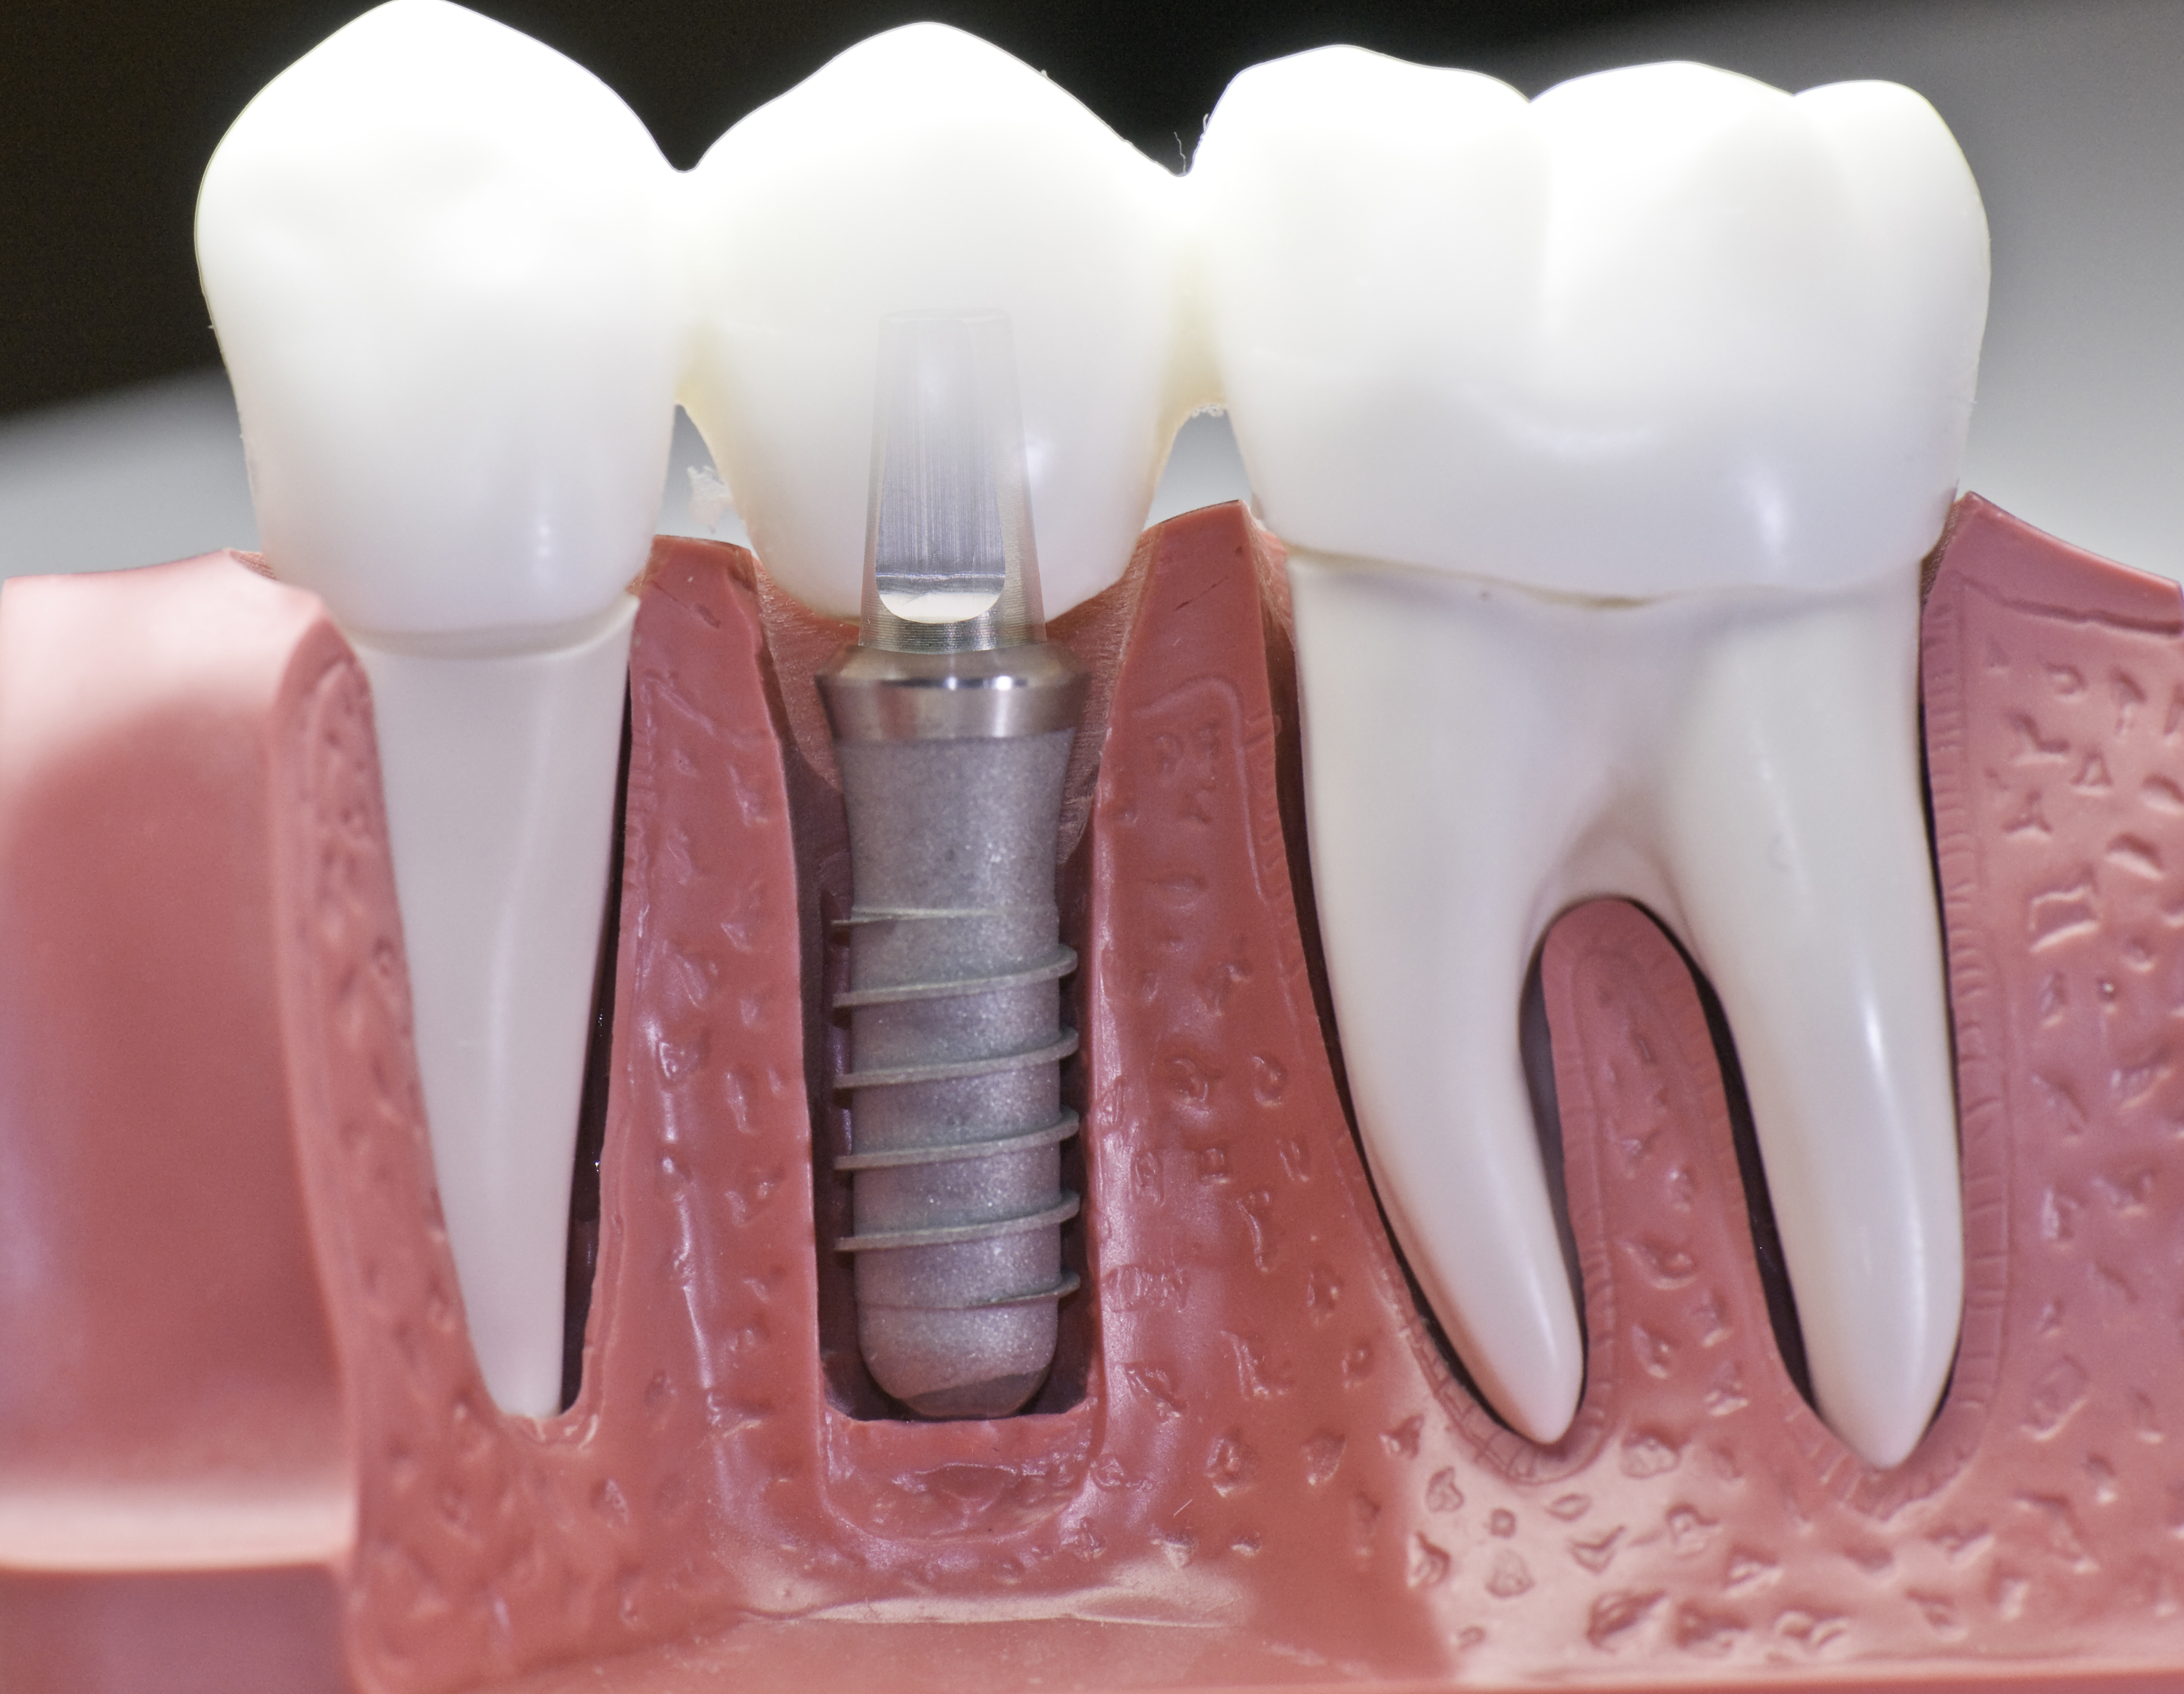 Dental Implants to Replace Missing Teeth - Fishers, IN - Dr. Jeremy Jones